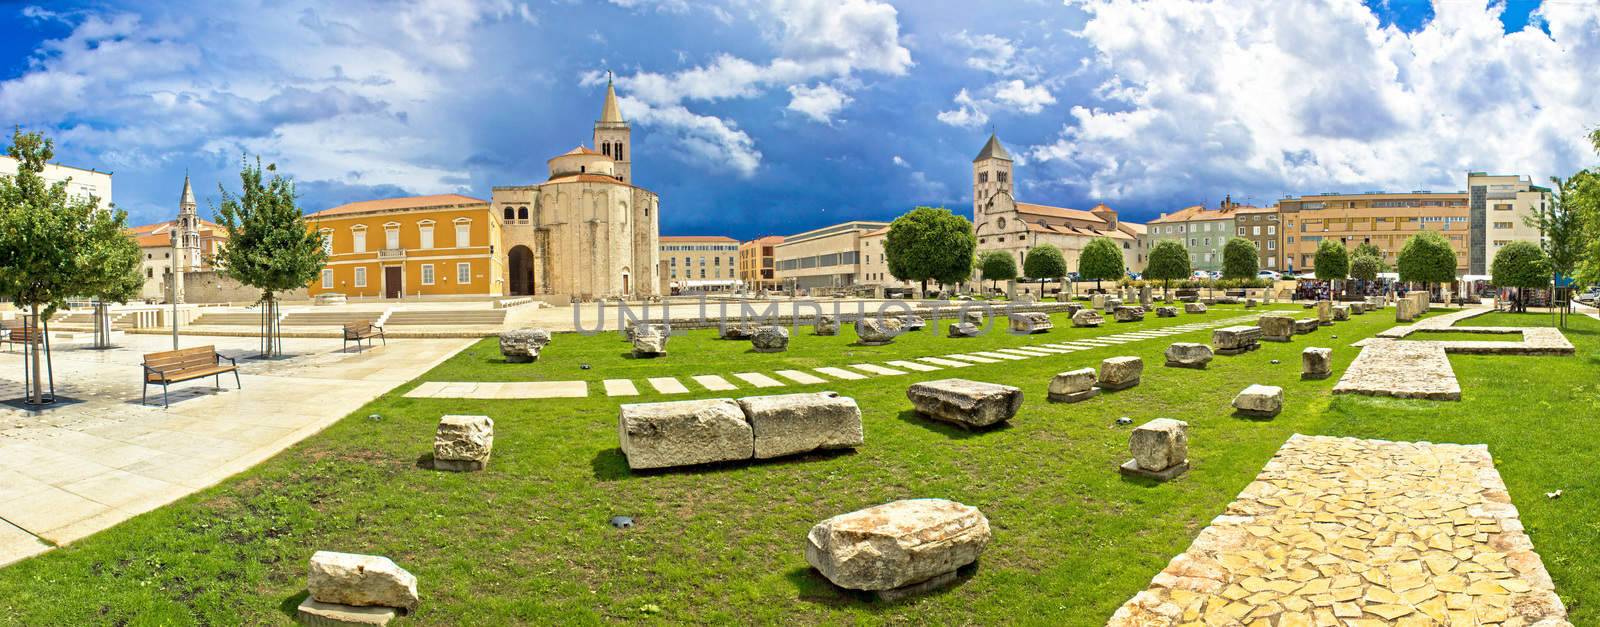 Zadar green square panoramic view by xbrchx